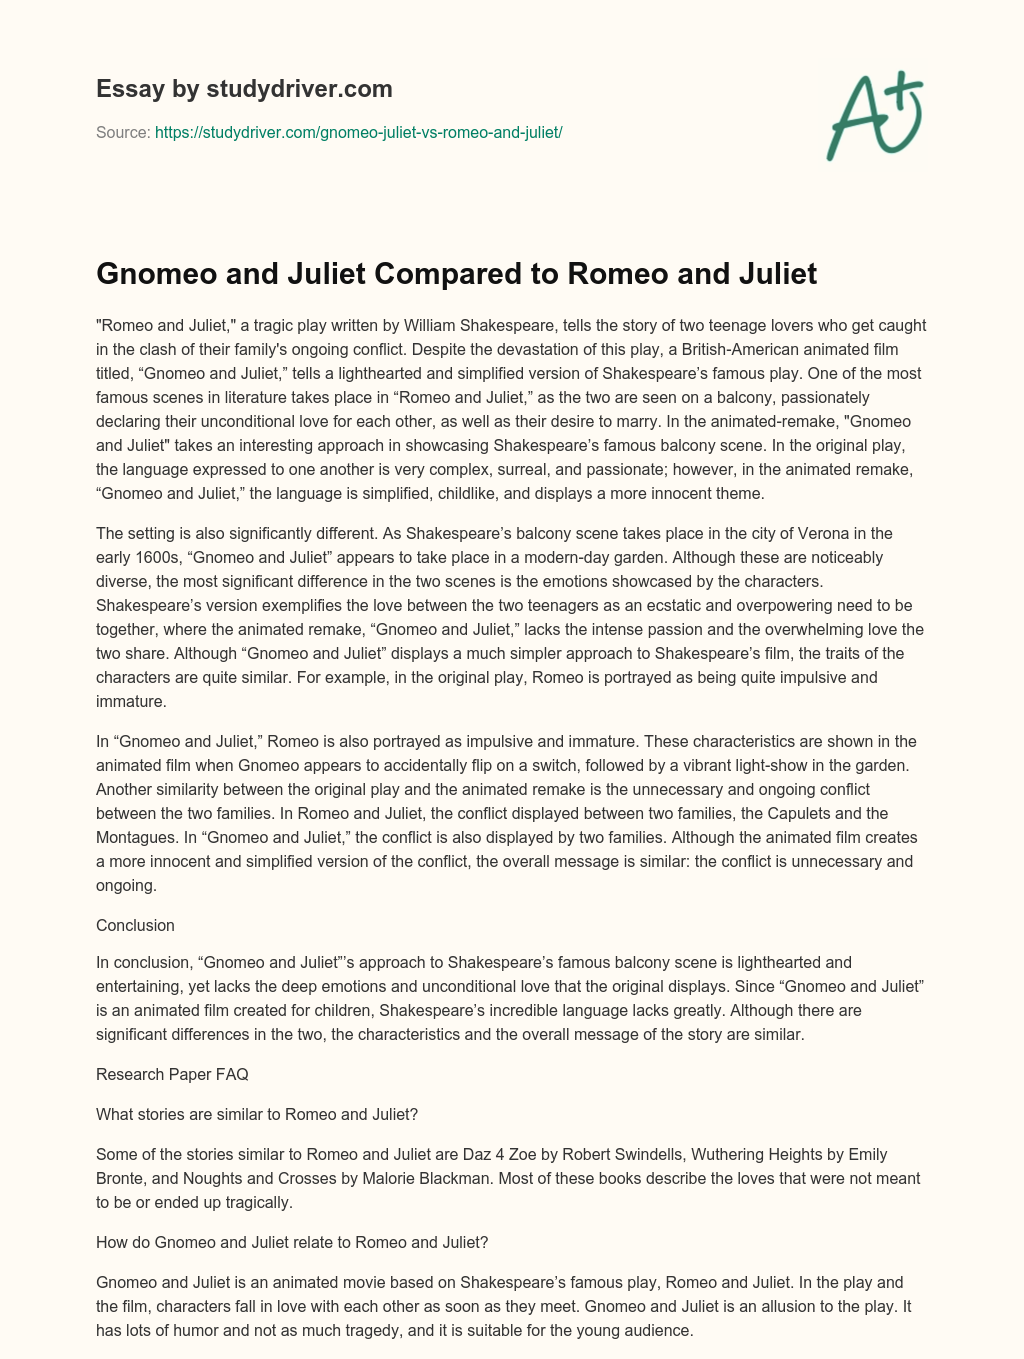 Gnomeo and Juliet Compared to Romeo and Juliet essay